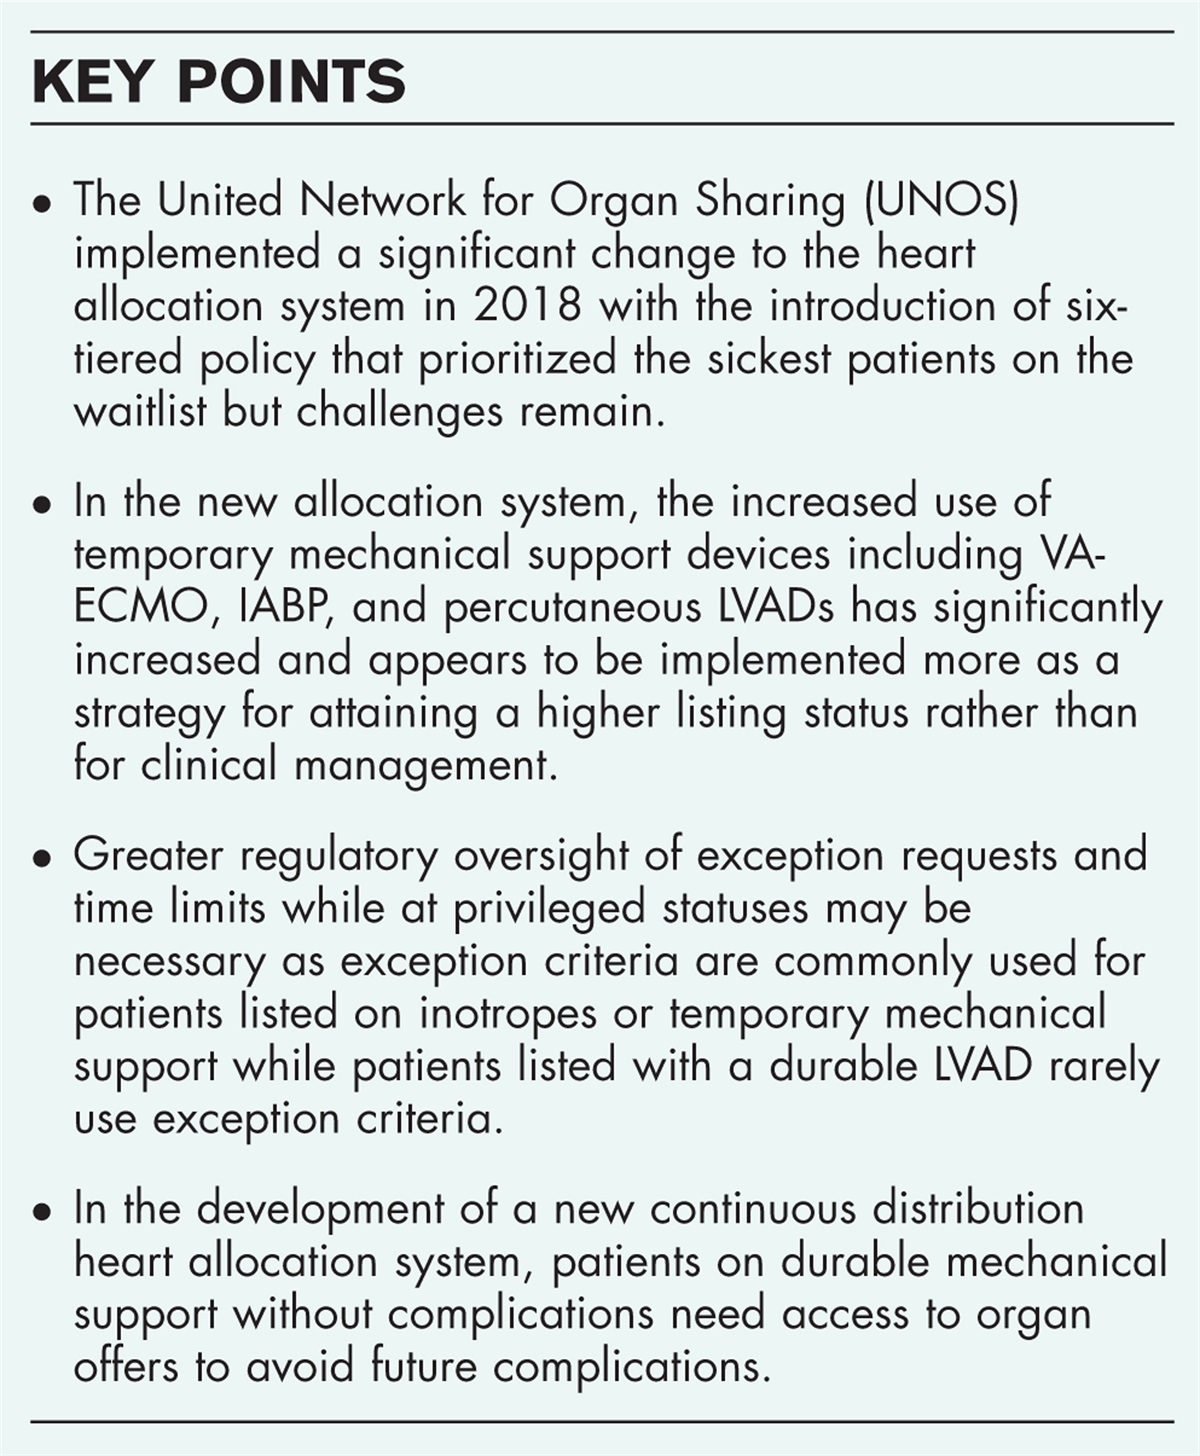 Challenges with the current United Network for Organ Sharing heart allocation system